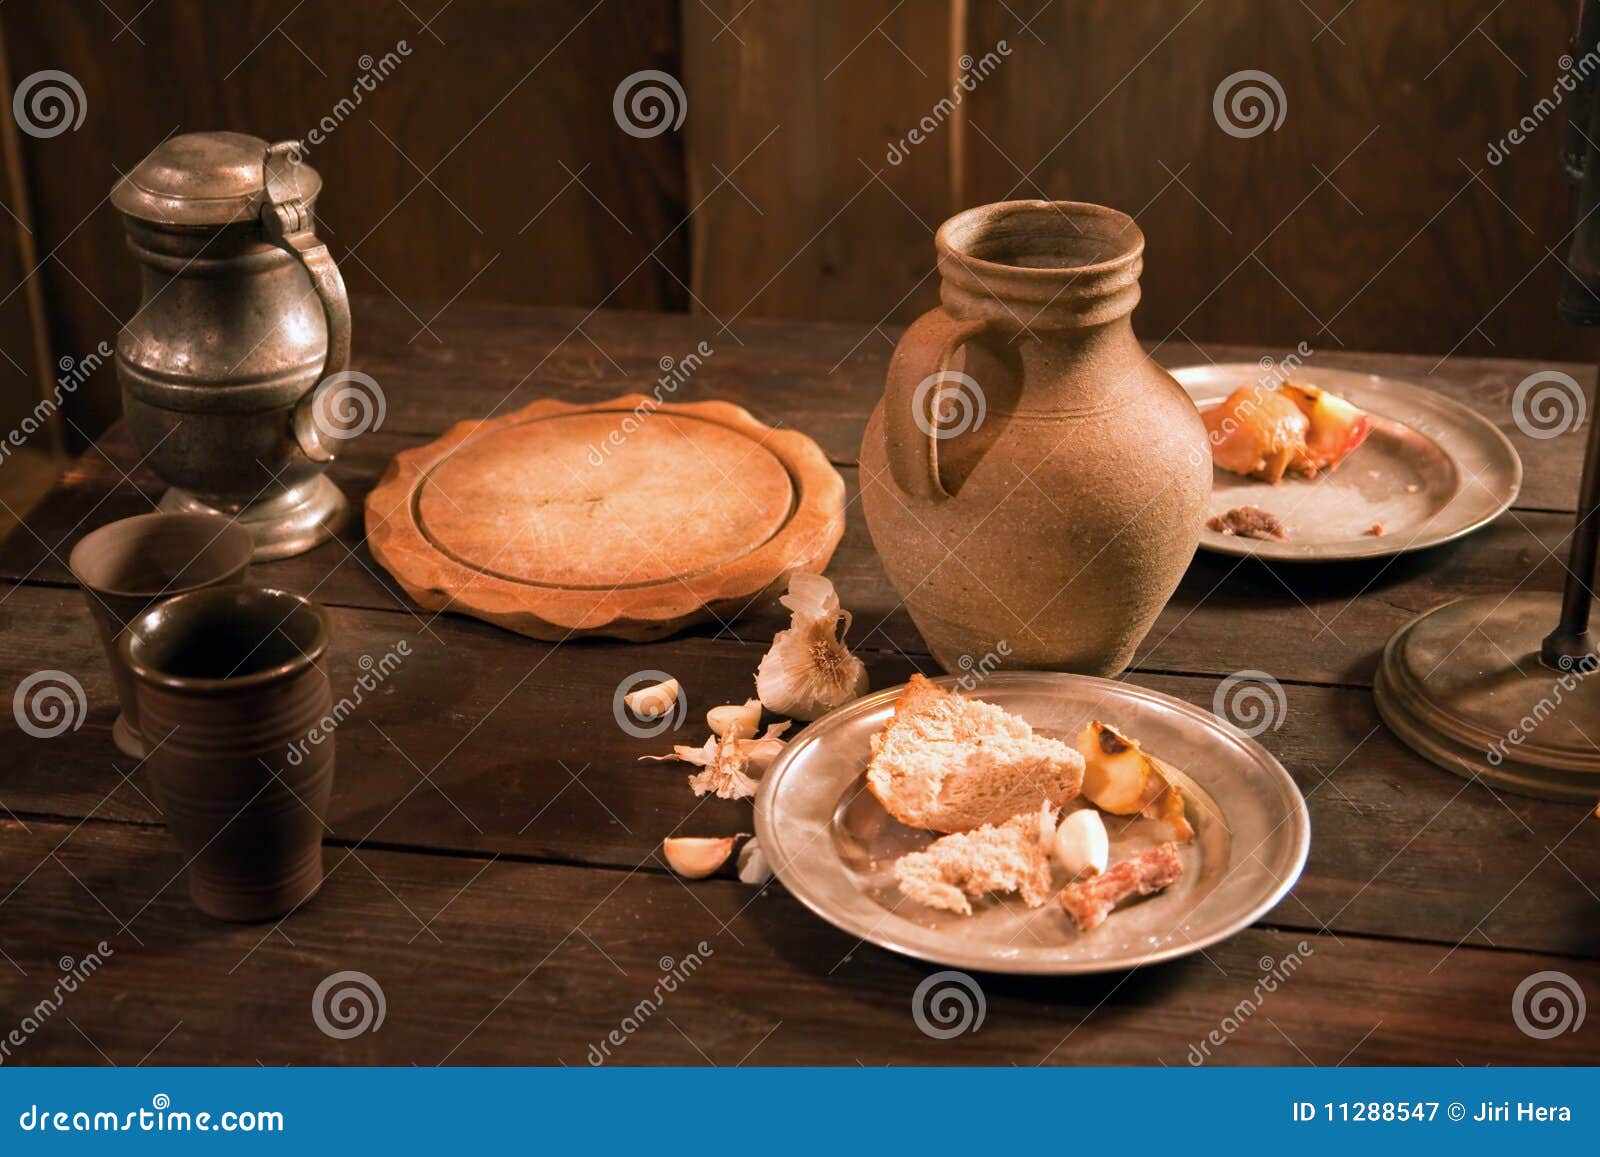 Medieval Feast Royalty Free Stock Photography - Image: 11288547